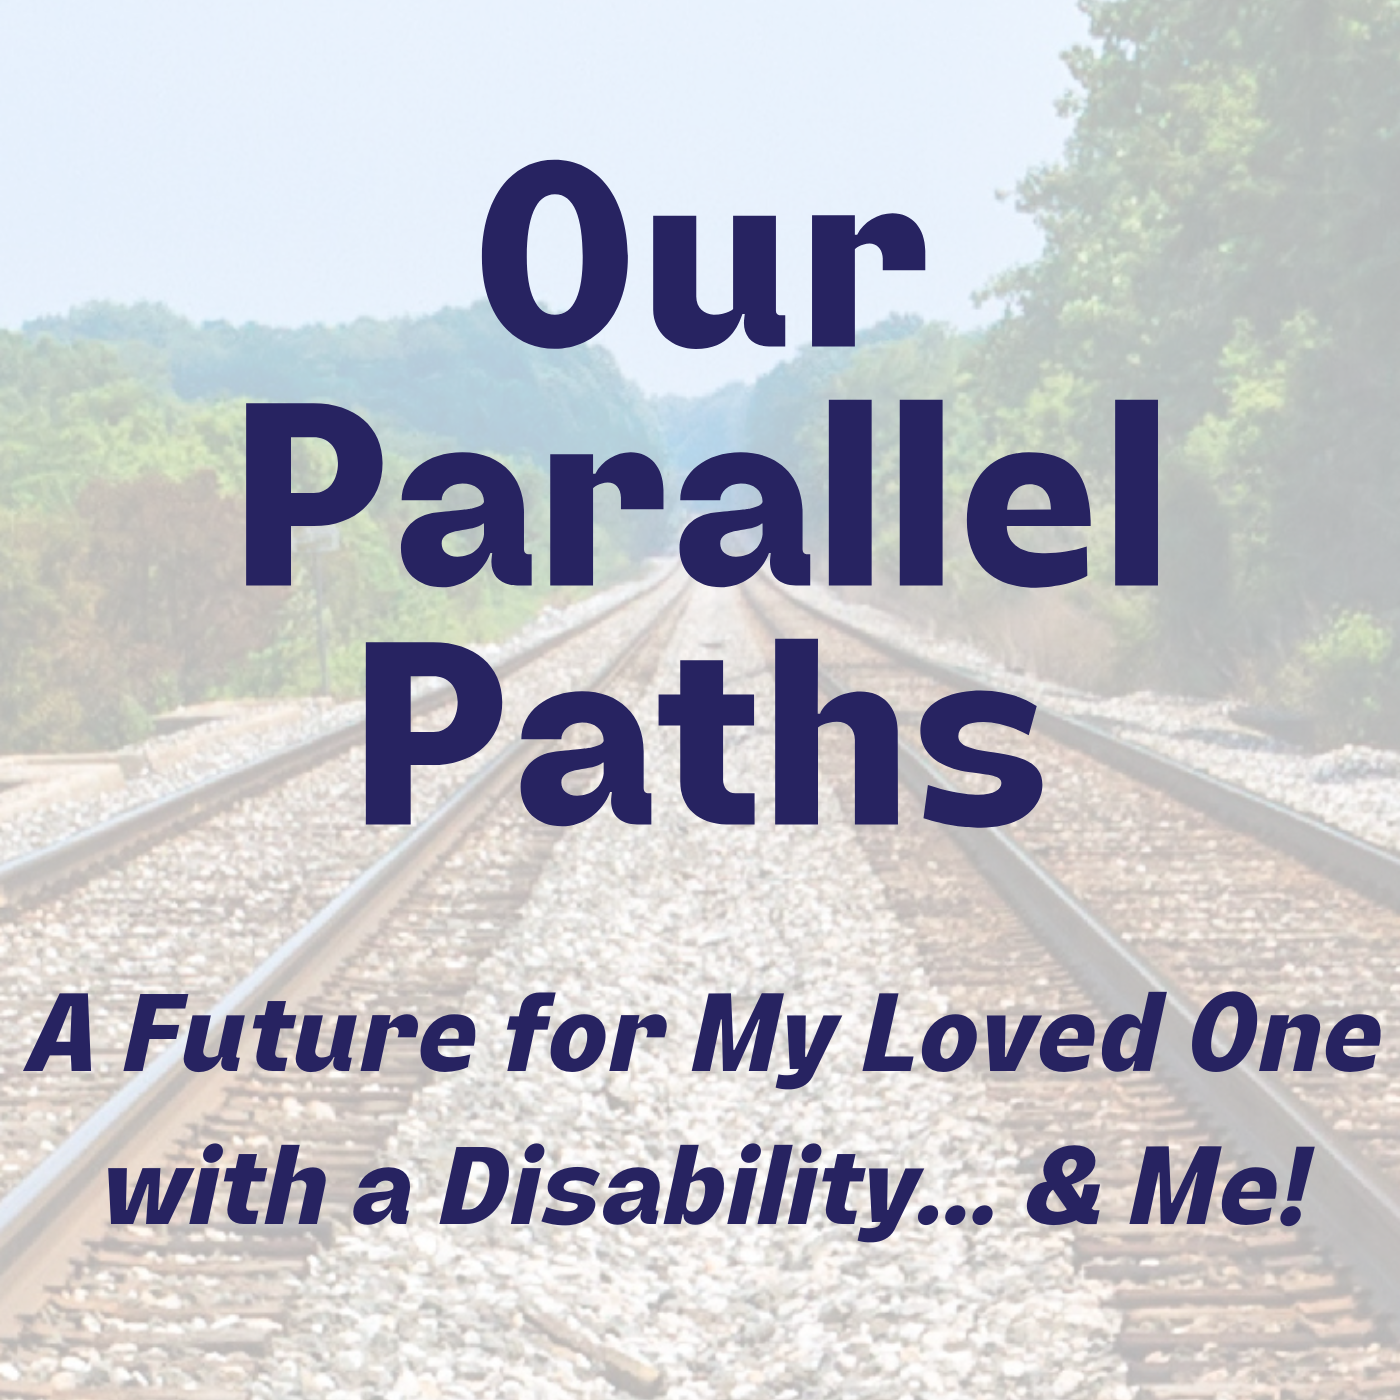 Our Parallel Paths: A Future for My Loved One With a Dsiability... & Me! (Image of two train tracks running parallel with one another)